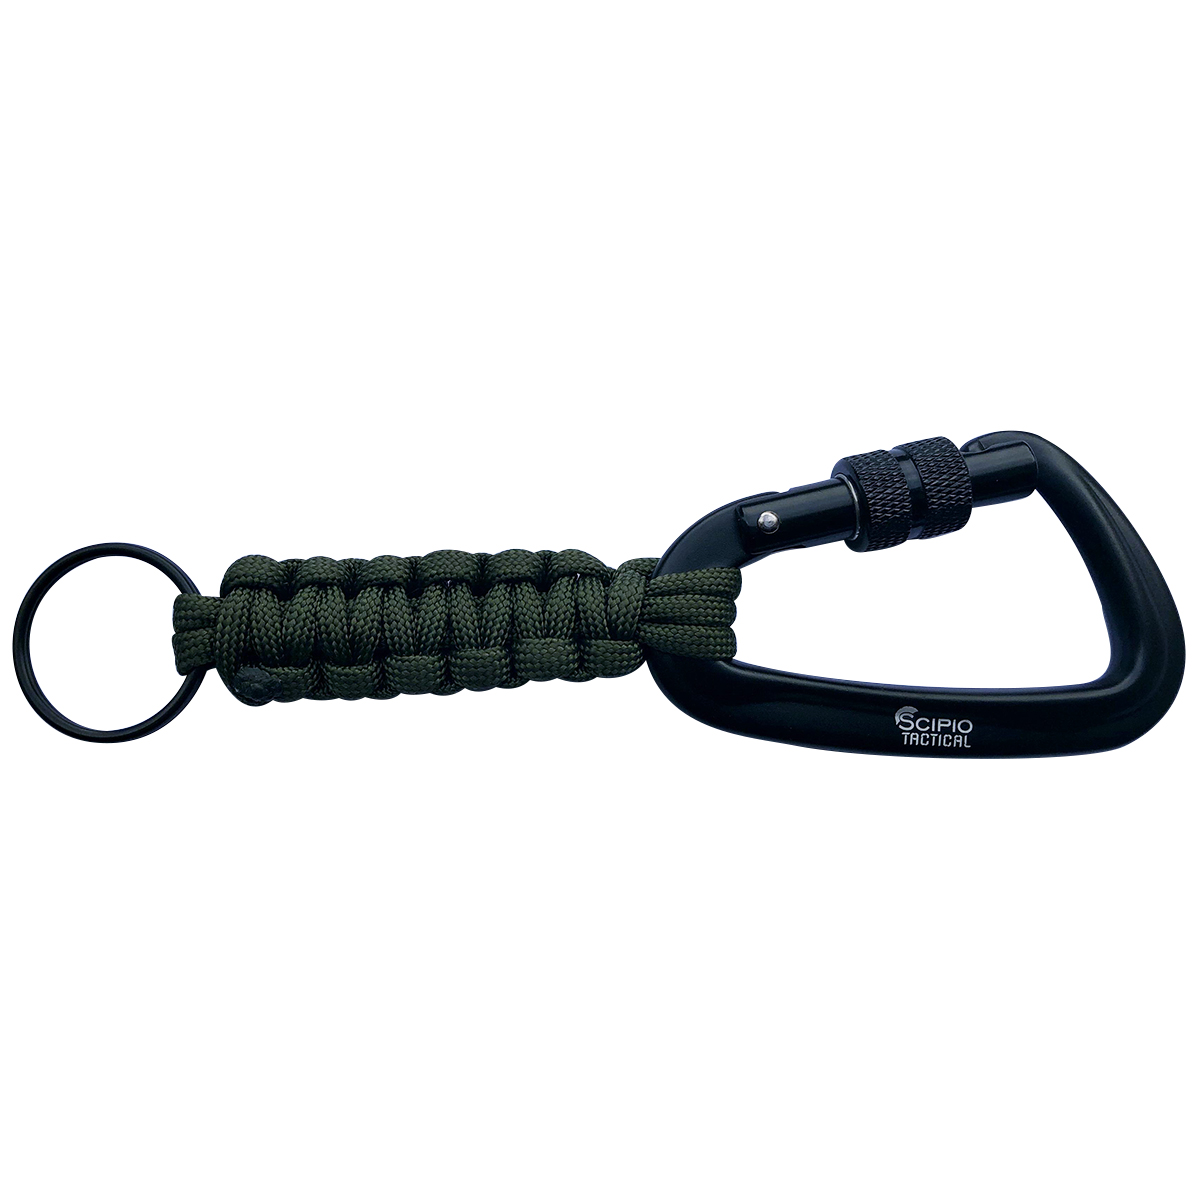 Scipio Carabiner Twist Closure 20901C - Carabiner Clip for Keys and Water Bottle Keychain and Paracord Hook with Secured Clippin